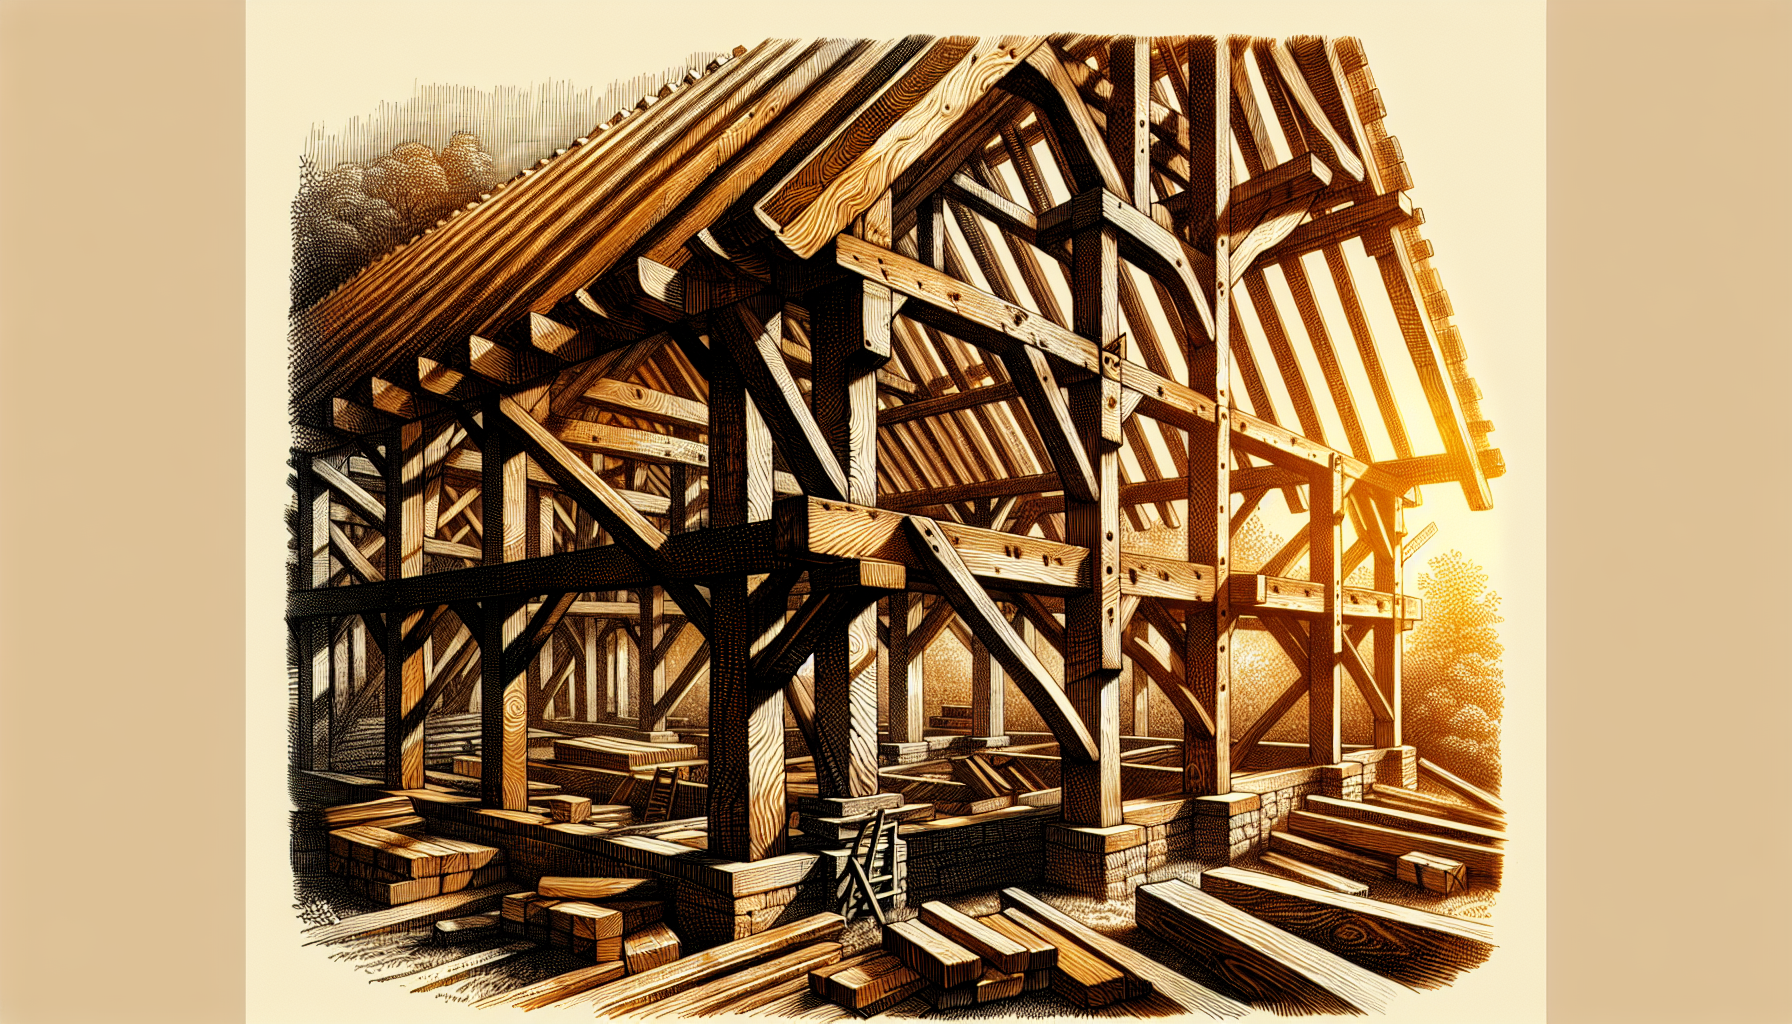 Timber frame construction with roof trusses